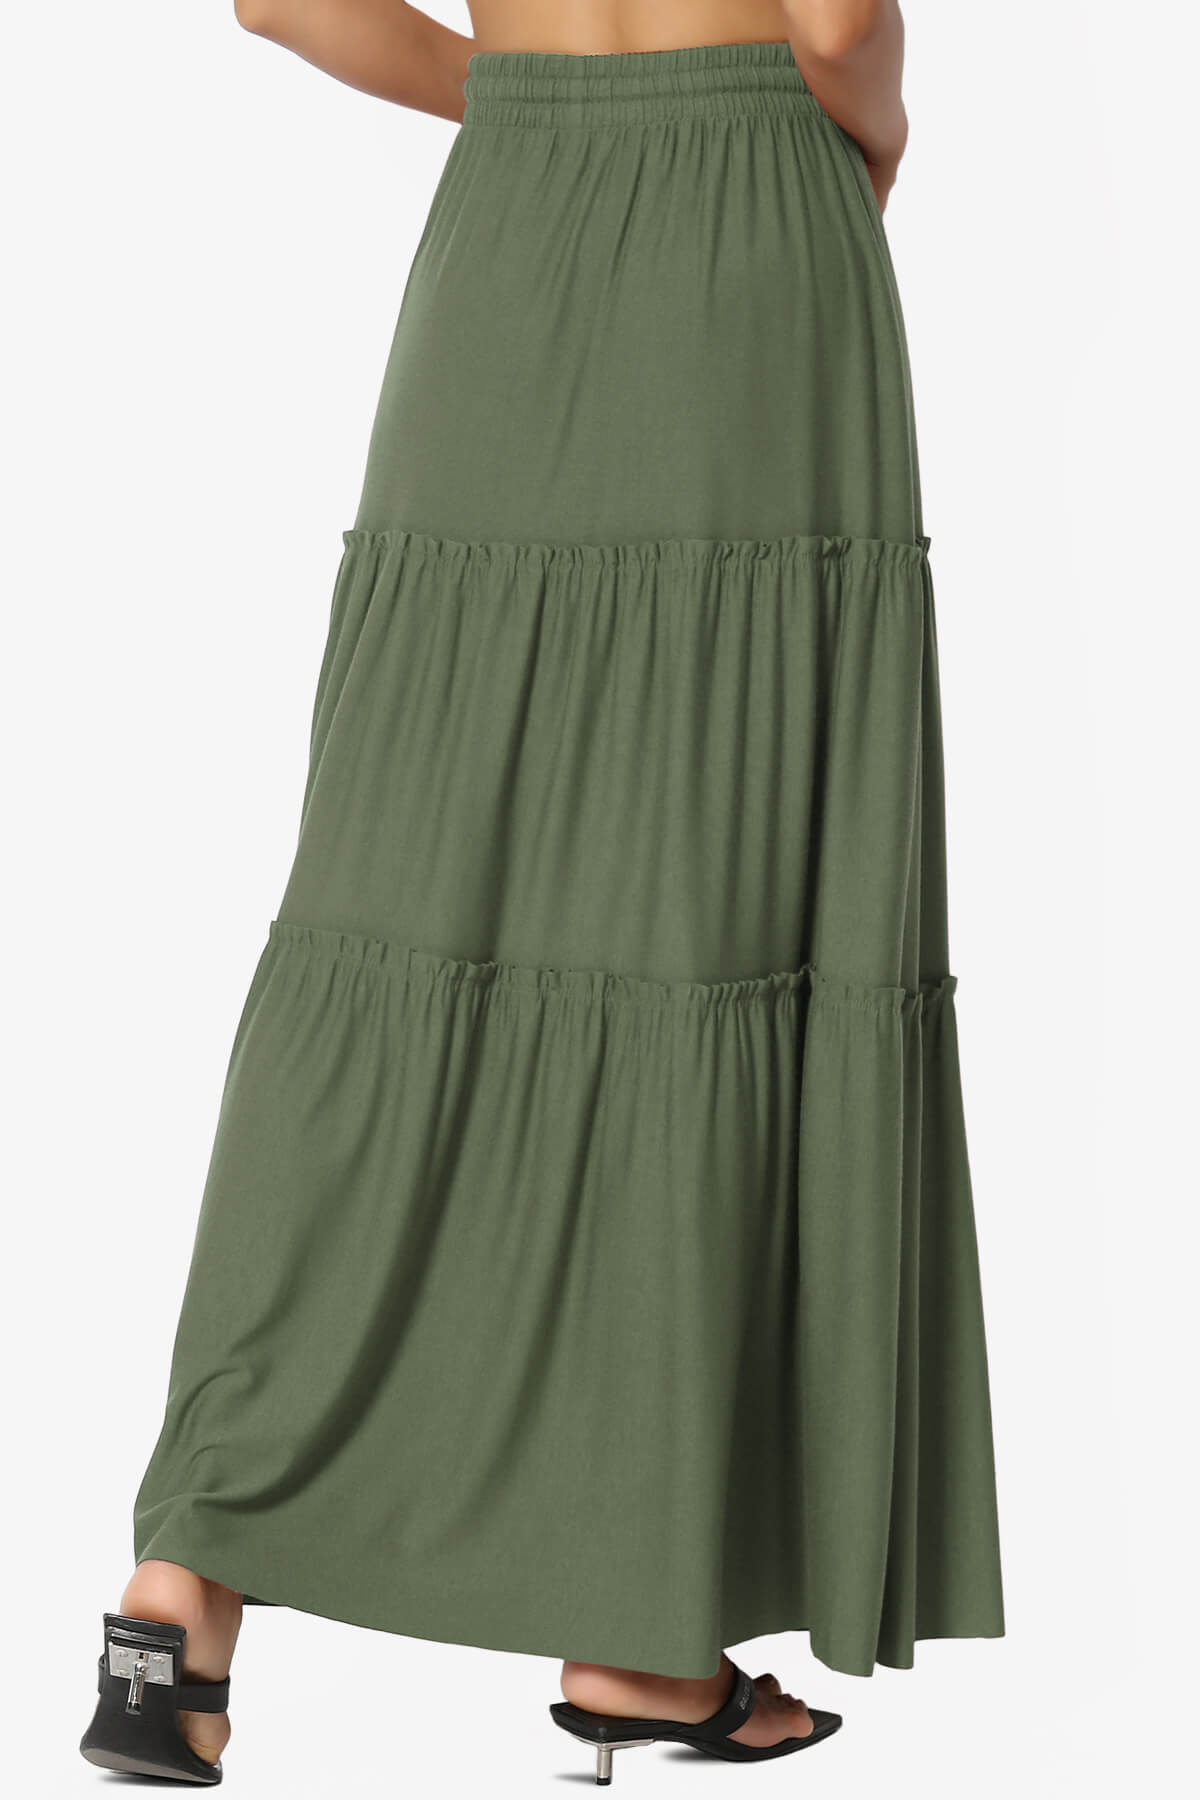 Load image into Gallery viewer, Kelton Ruffle Tiered Jersey Maxi Skirt DUSTY OLIVE_2
